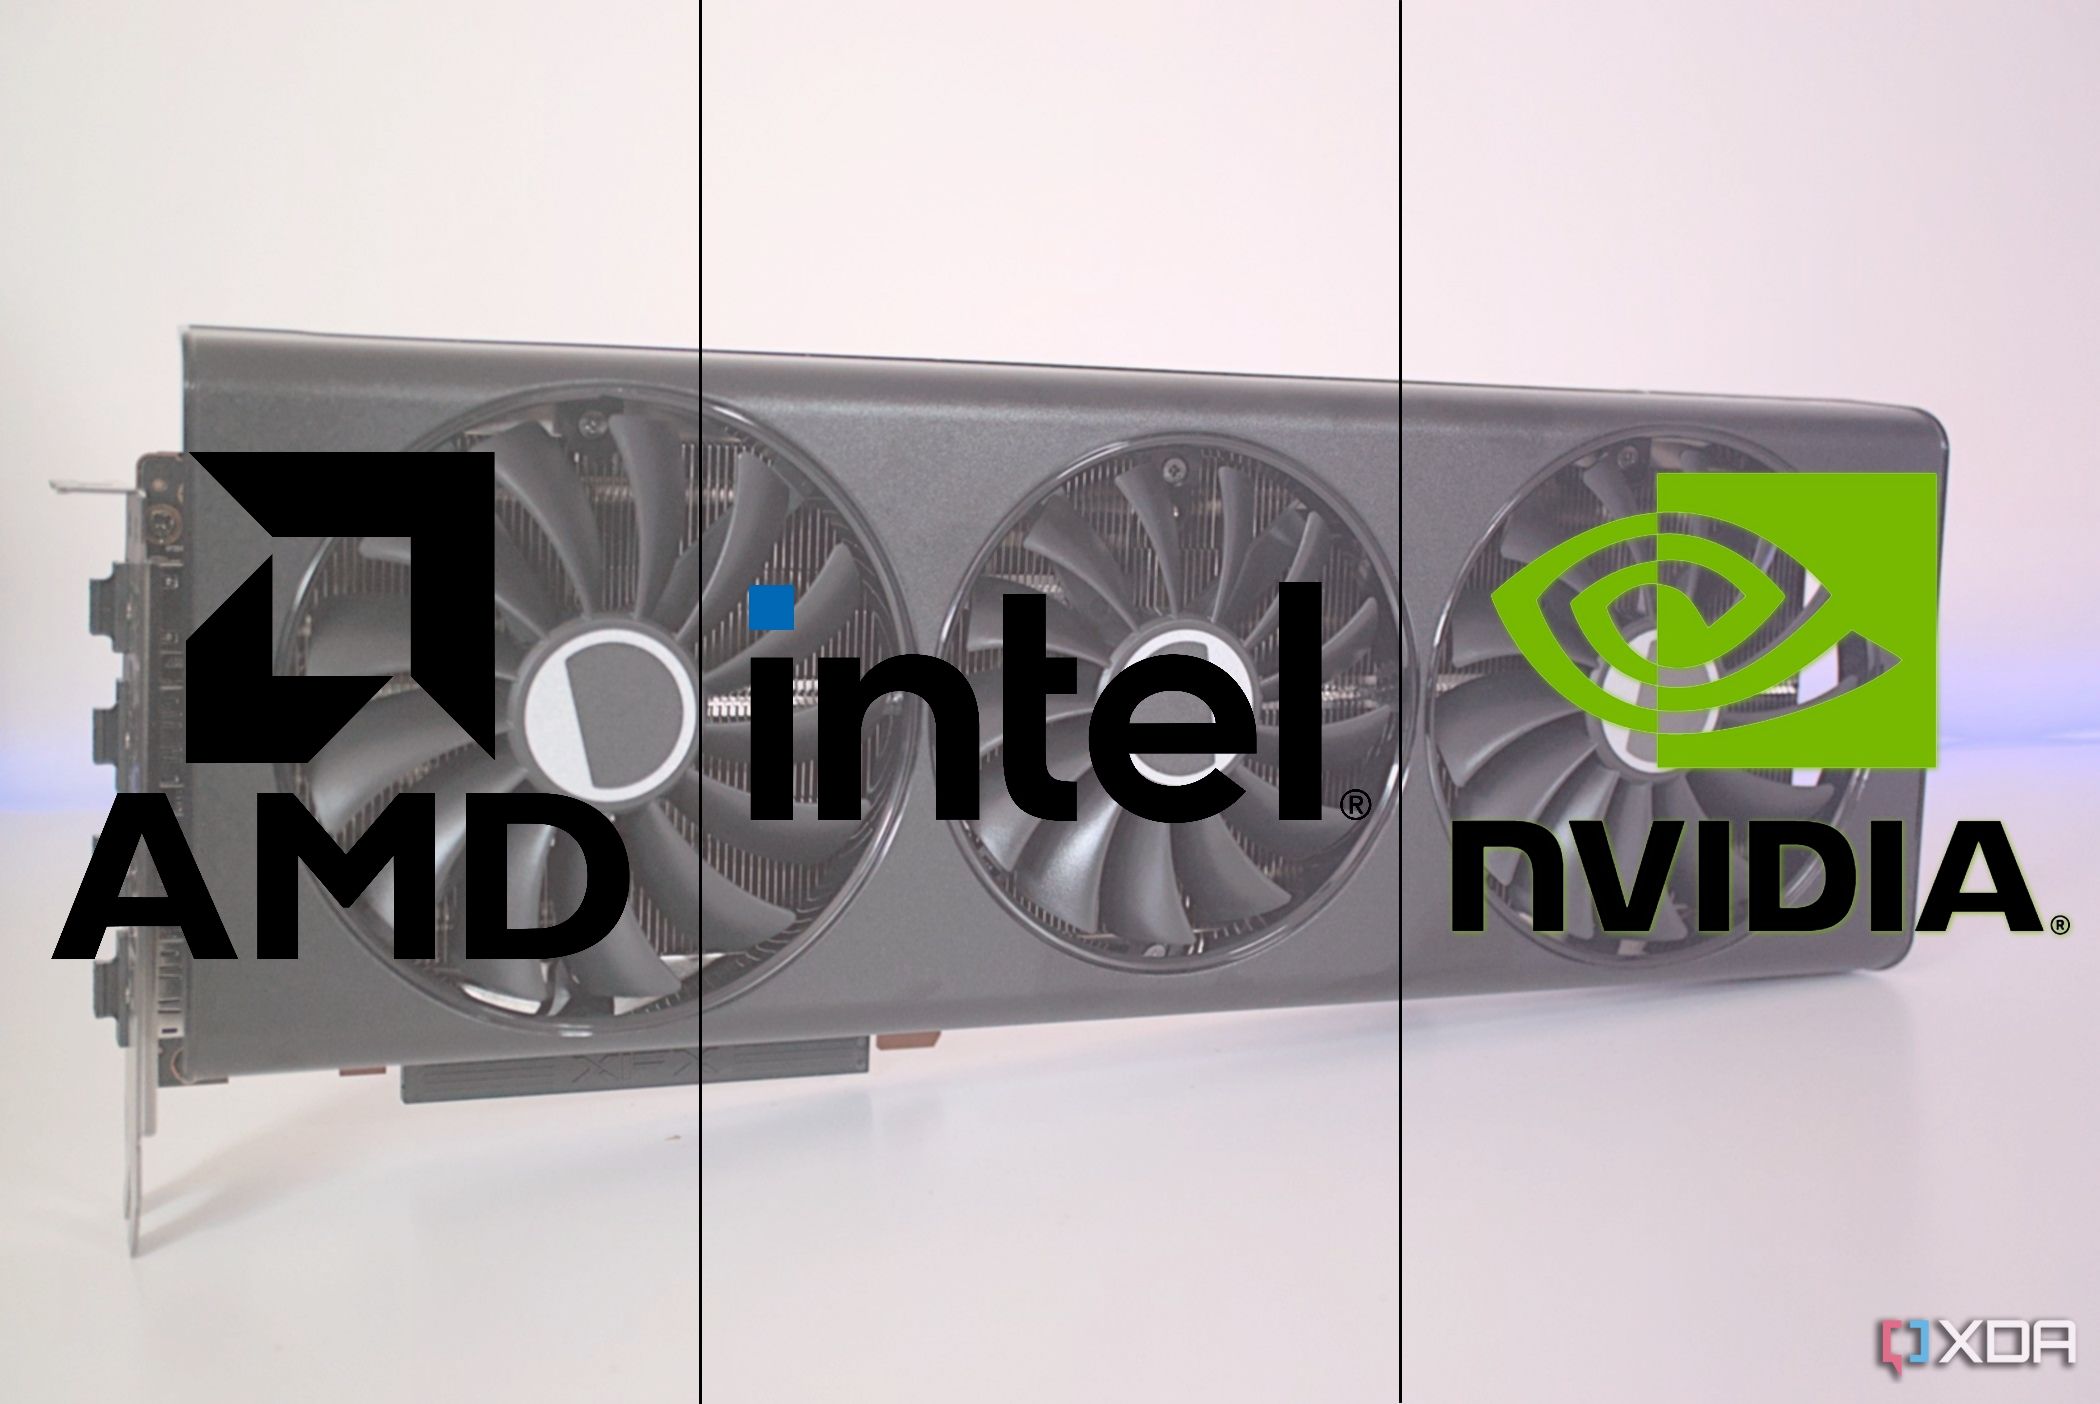 AMD, Intel, and Nvidia logos overlaid on a picture of a graphics card